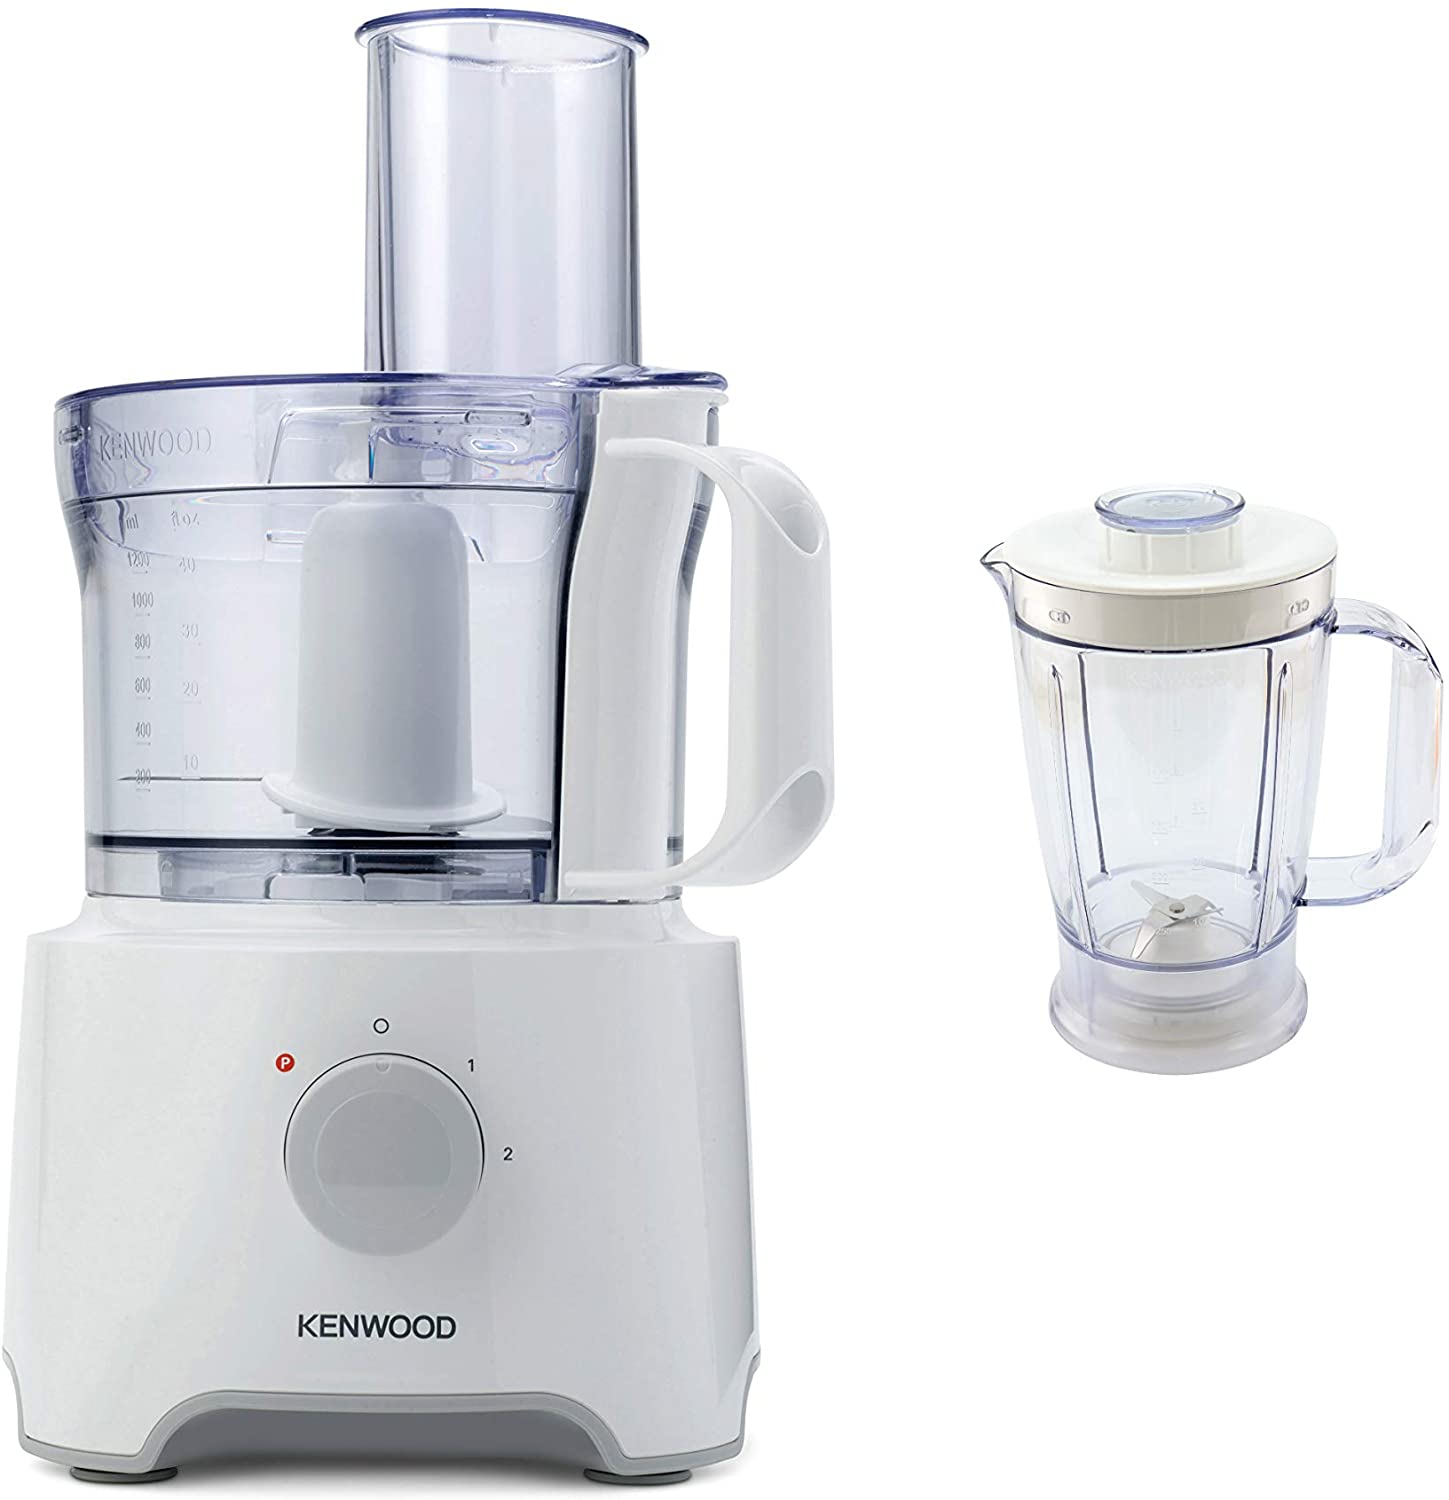 Kenwood Multipro Compact Food Processor - FDP301WH